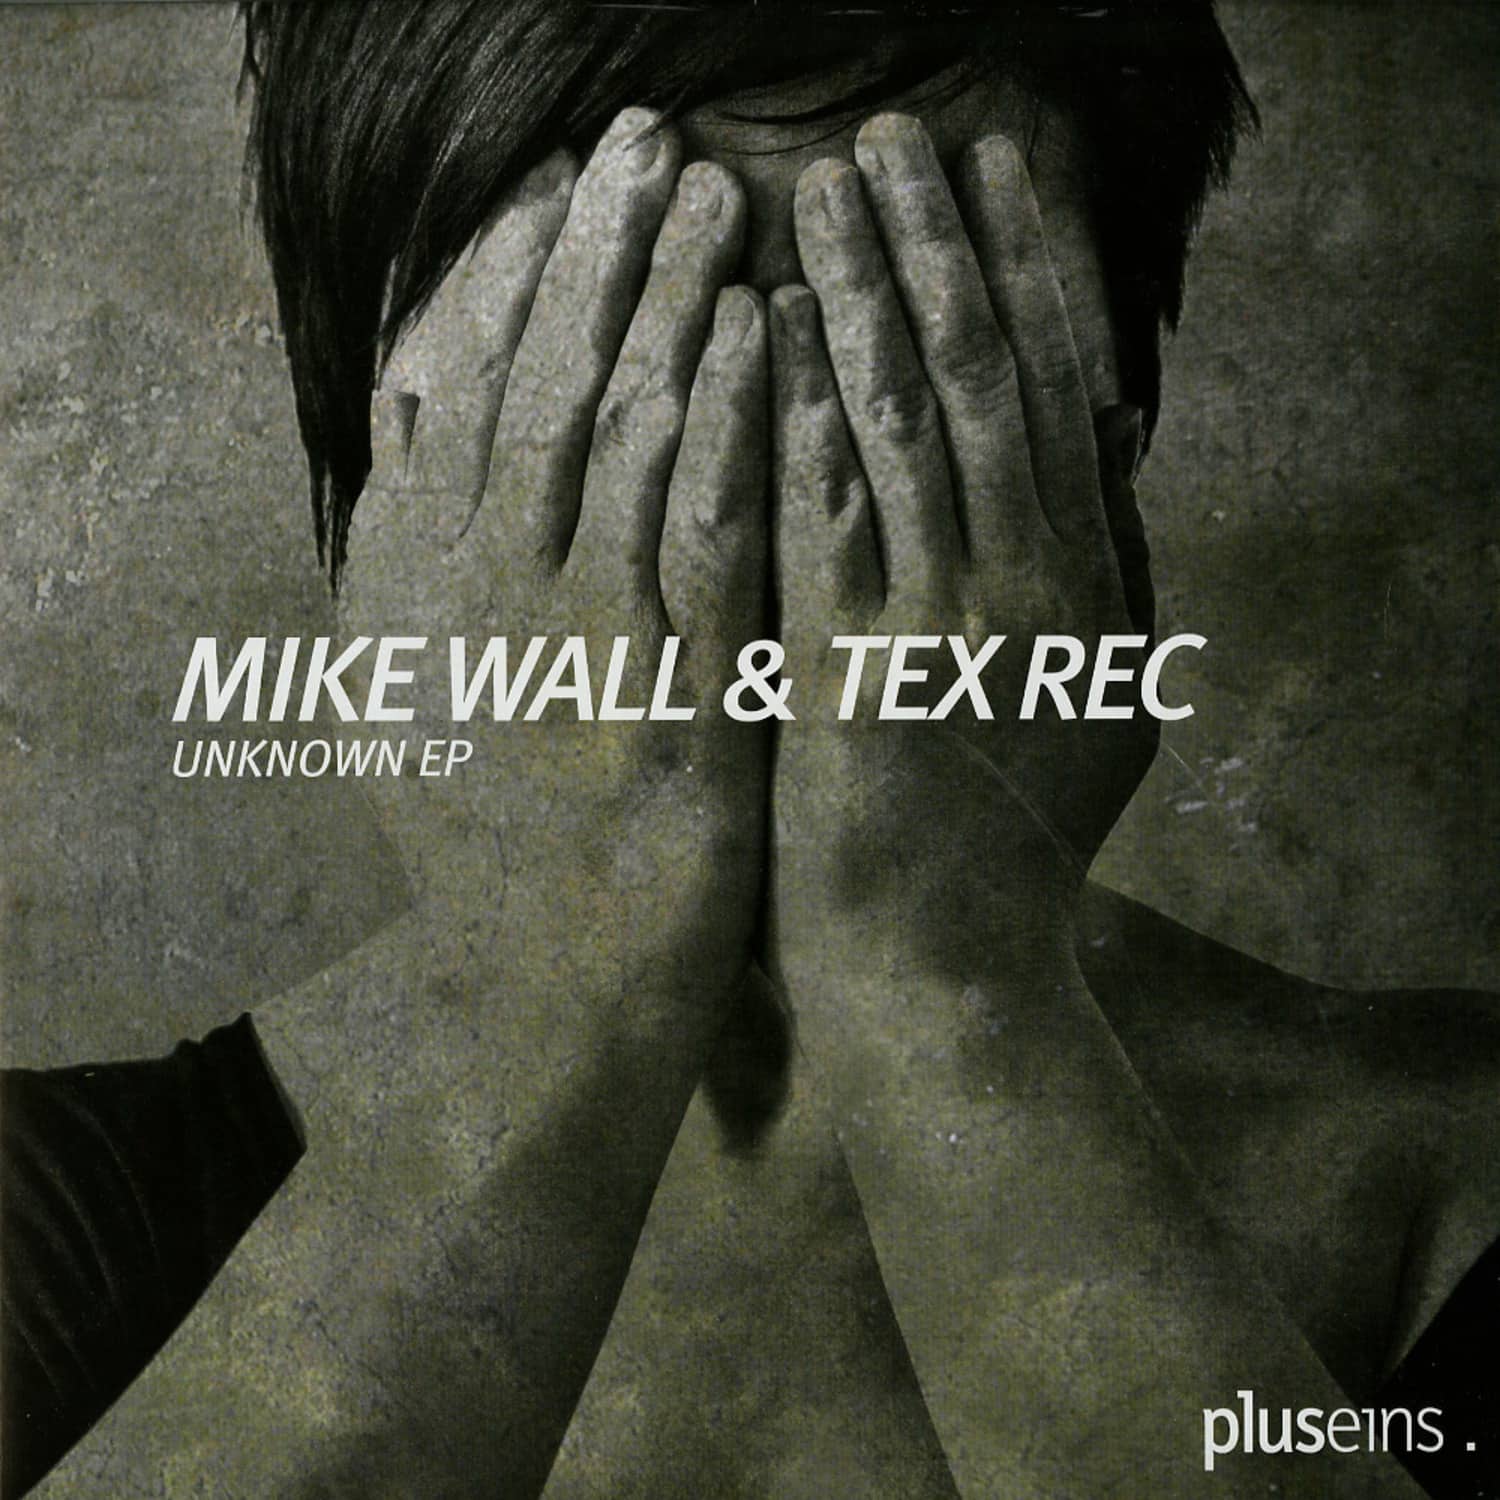 Mike Wall & Tex Rec - UNKNOWN EP 